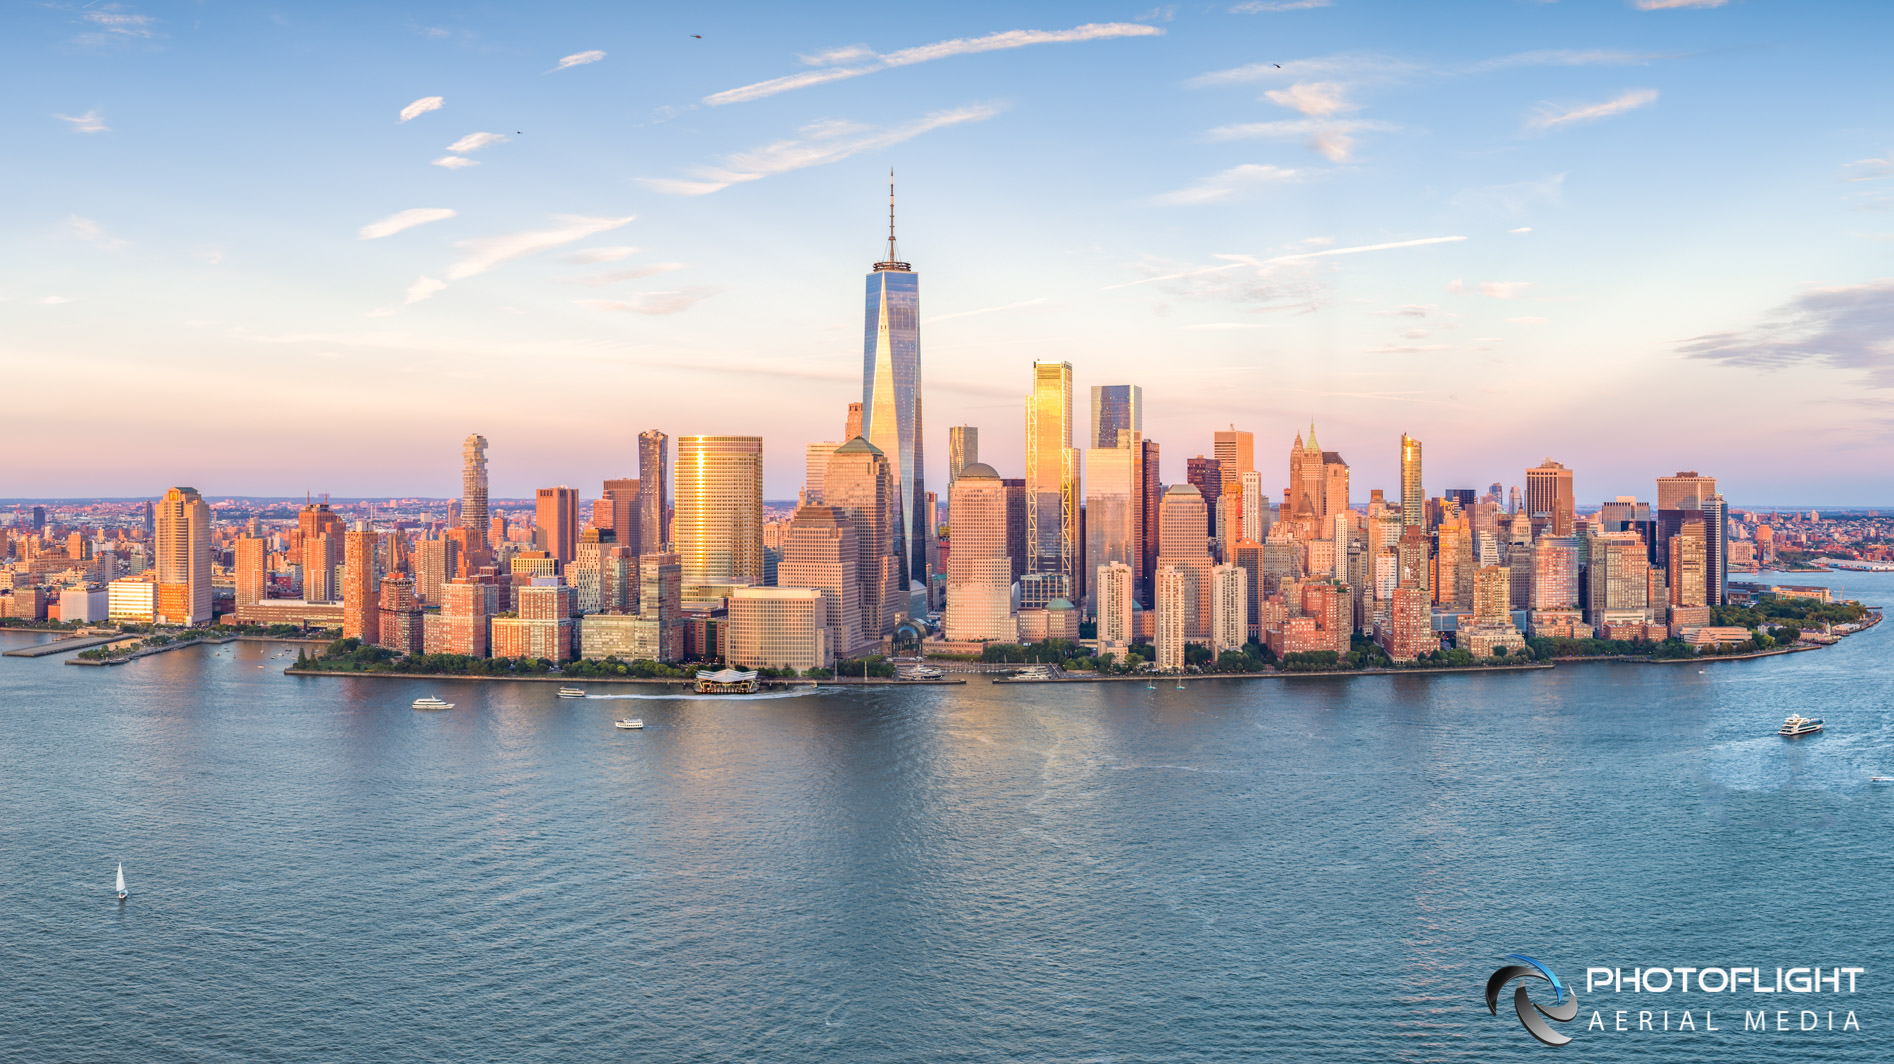 NYC Manhattan Financial District Sunset, NYC Aerial Drone Panorama, Subject to copyright ©Photoflight Aerial Media Subject to copyright ©Photoflight Aerial Media